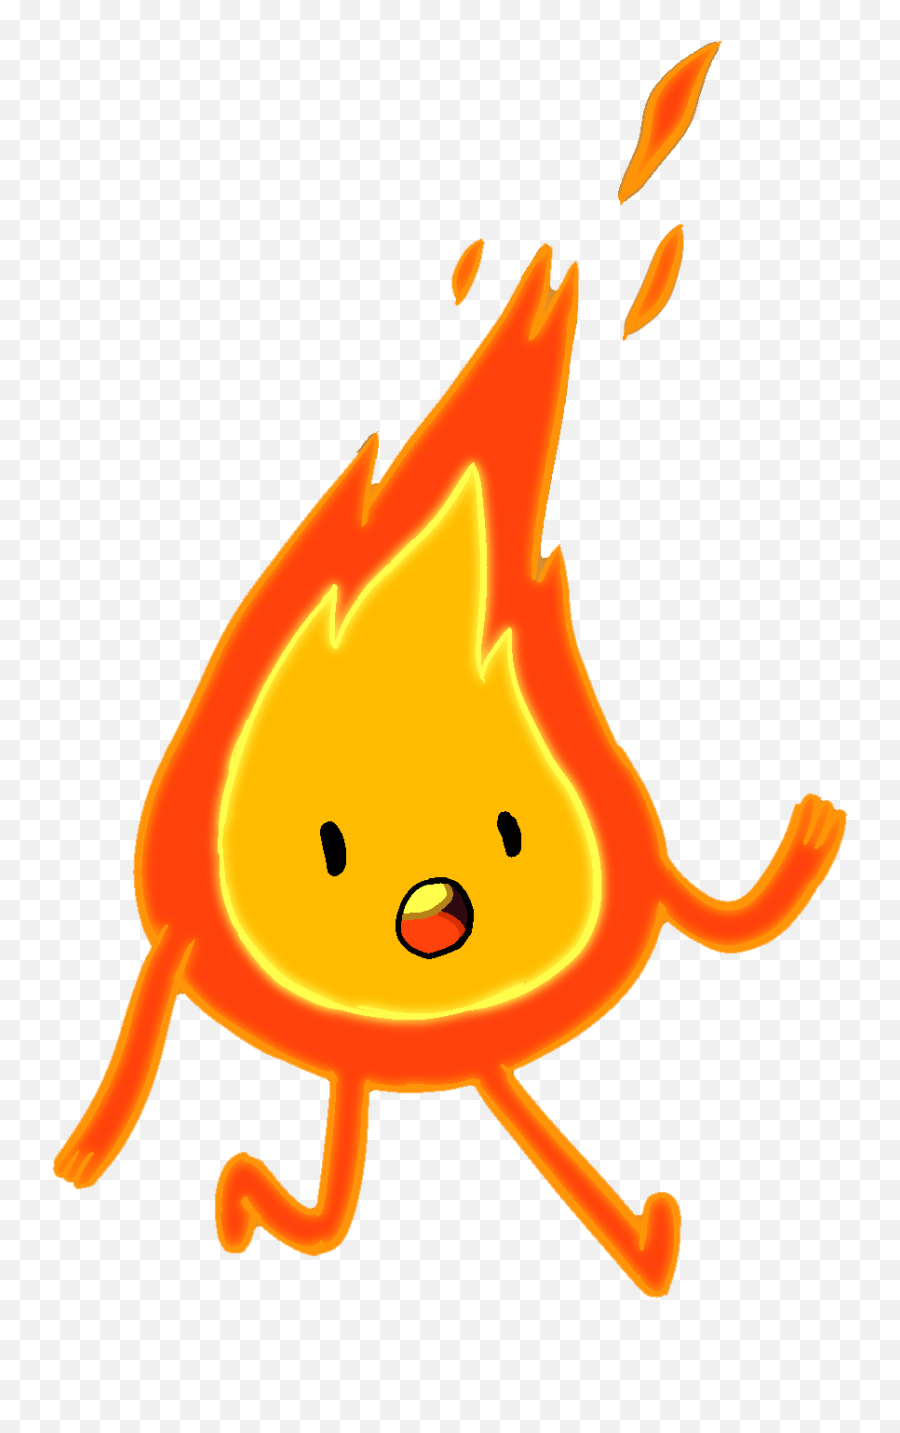 Emojis Are Hot Right Now - Emoji Flama Png Free Adventure Time Flame Png,Ark Survival Emojis